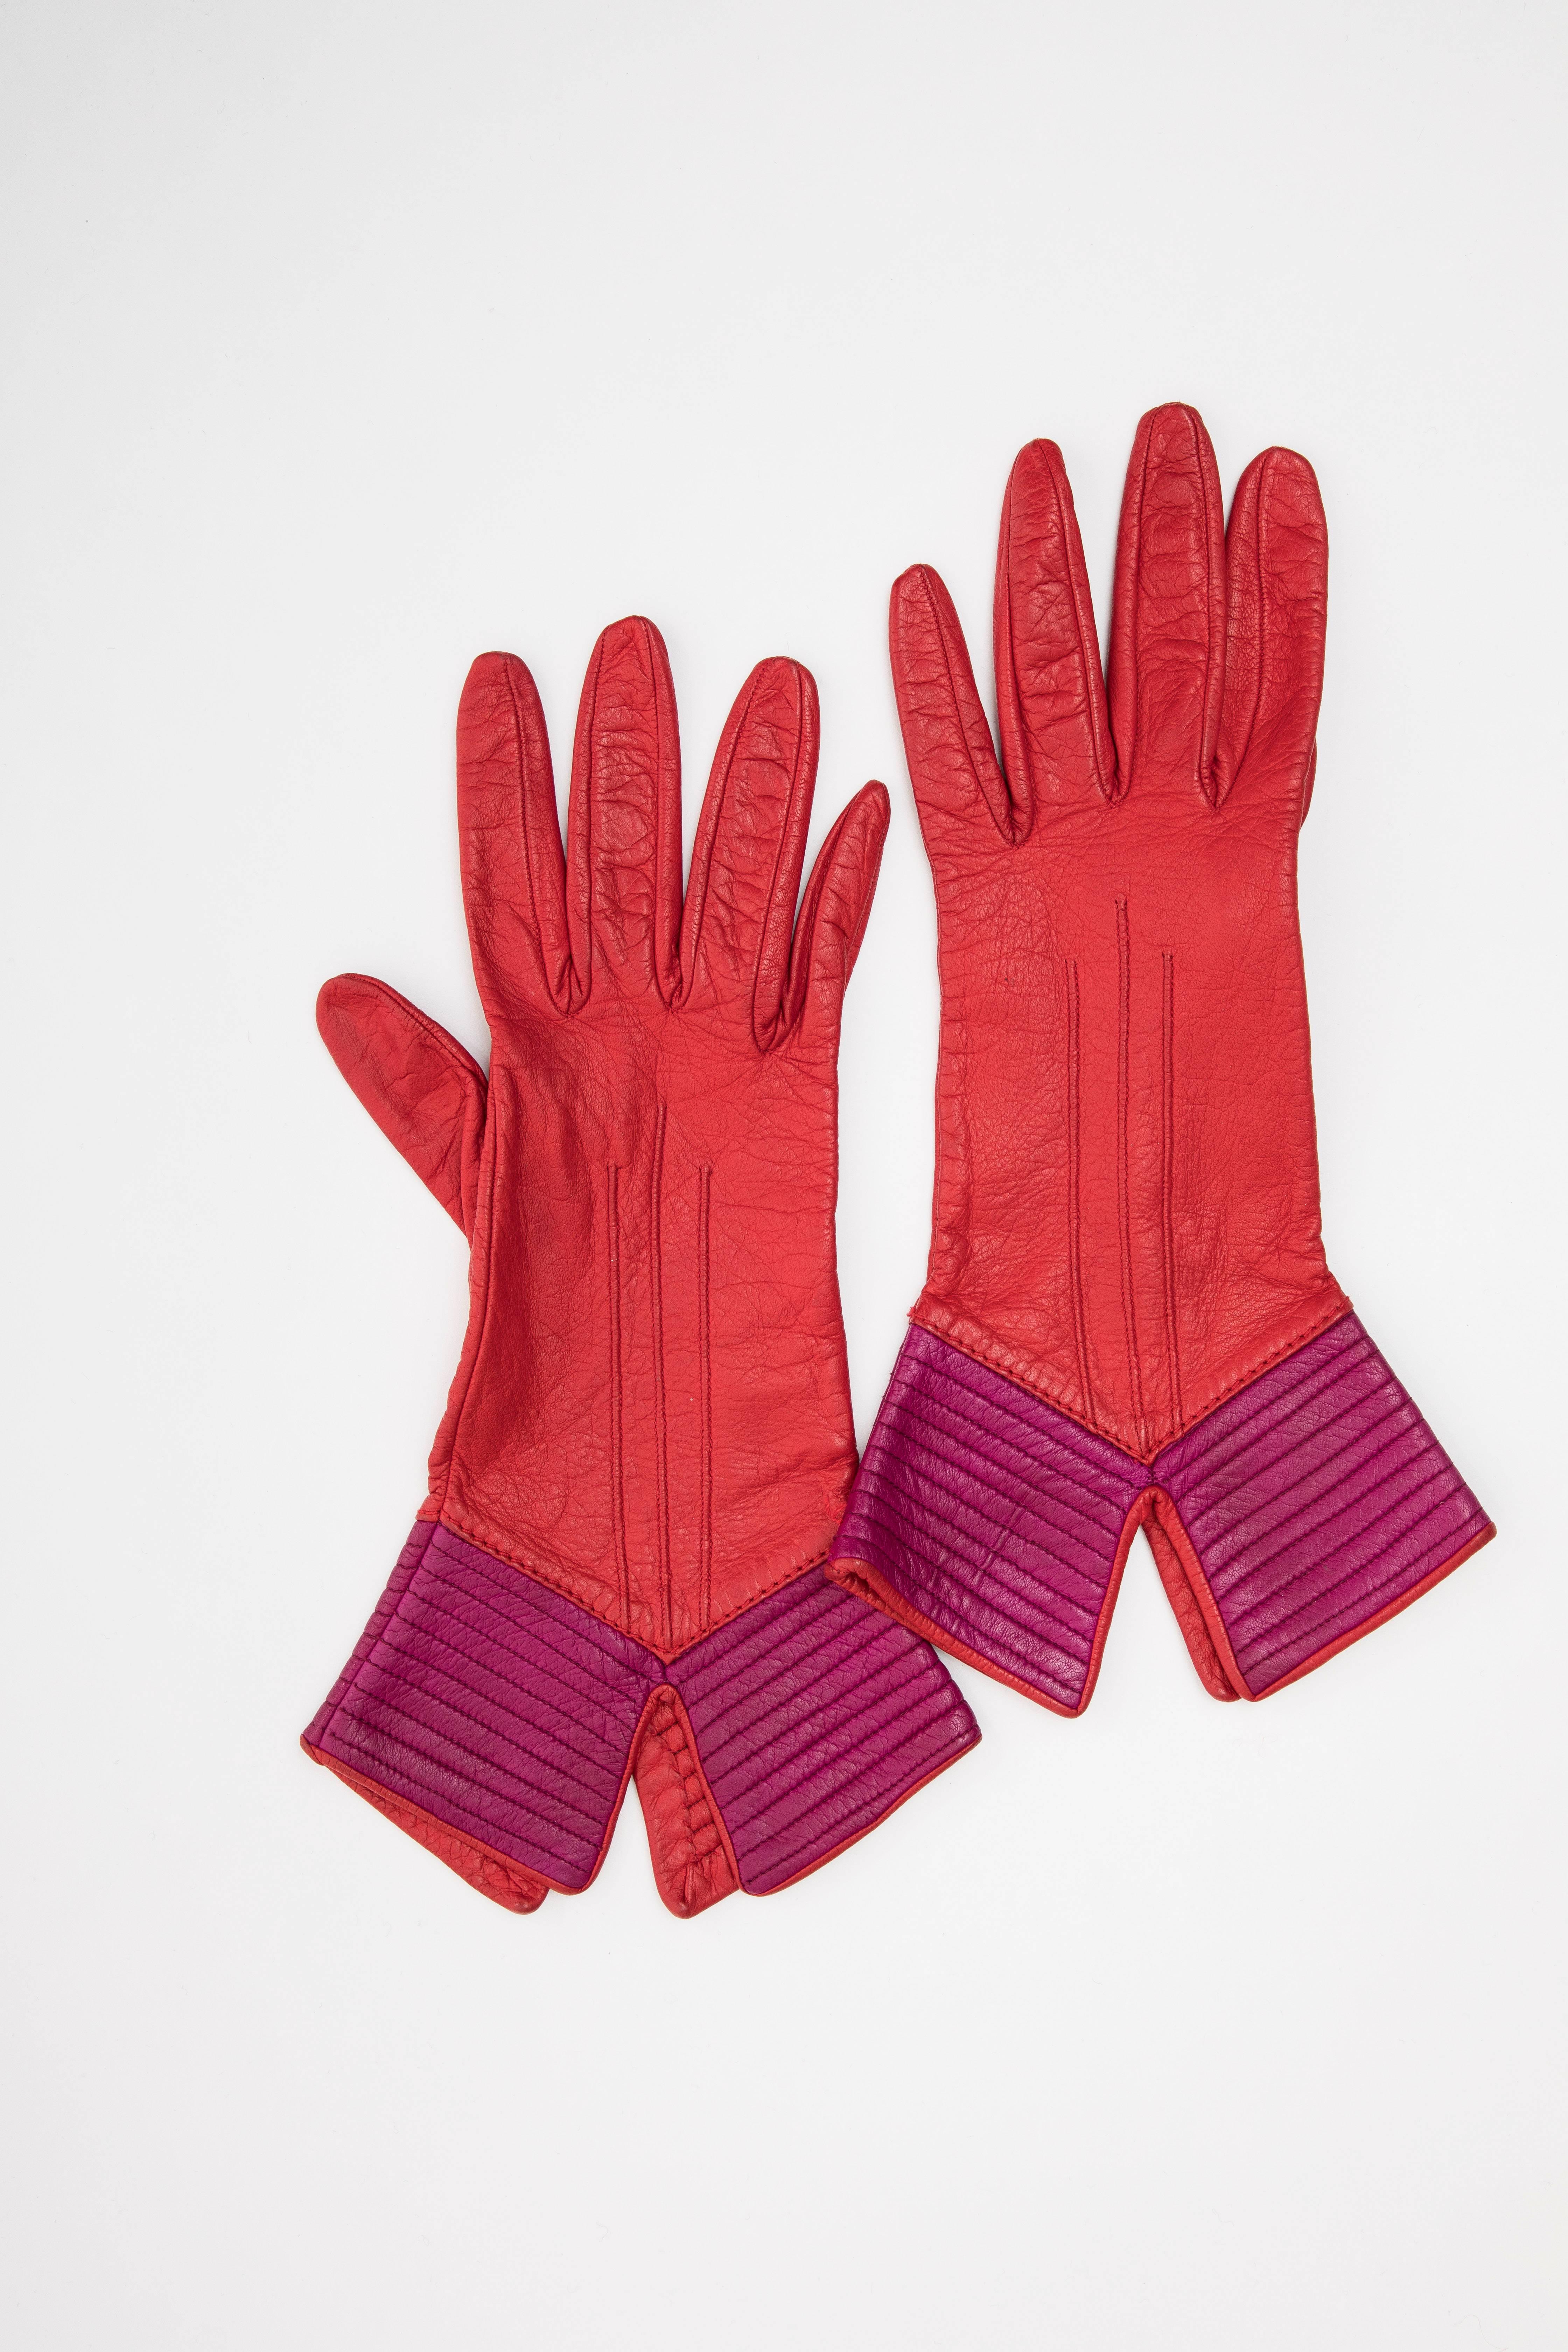 Red Yves Saint Laurent Color-Block Leather Gloves Silk Lining, Circa 1970s For Sale